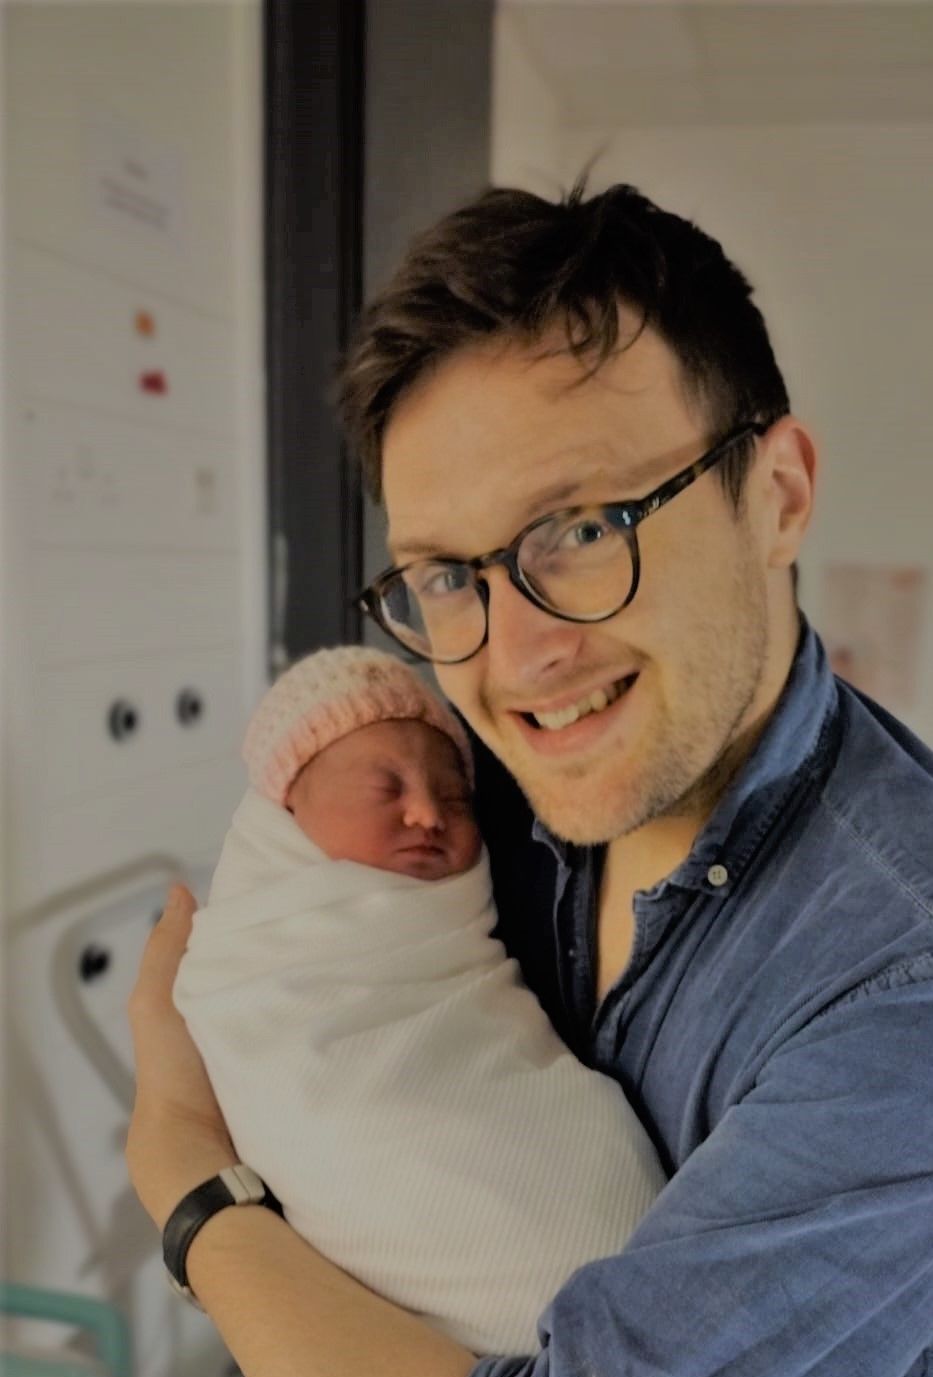 hypnobirthing new dad and birth partner smili8ng and holding new baby